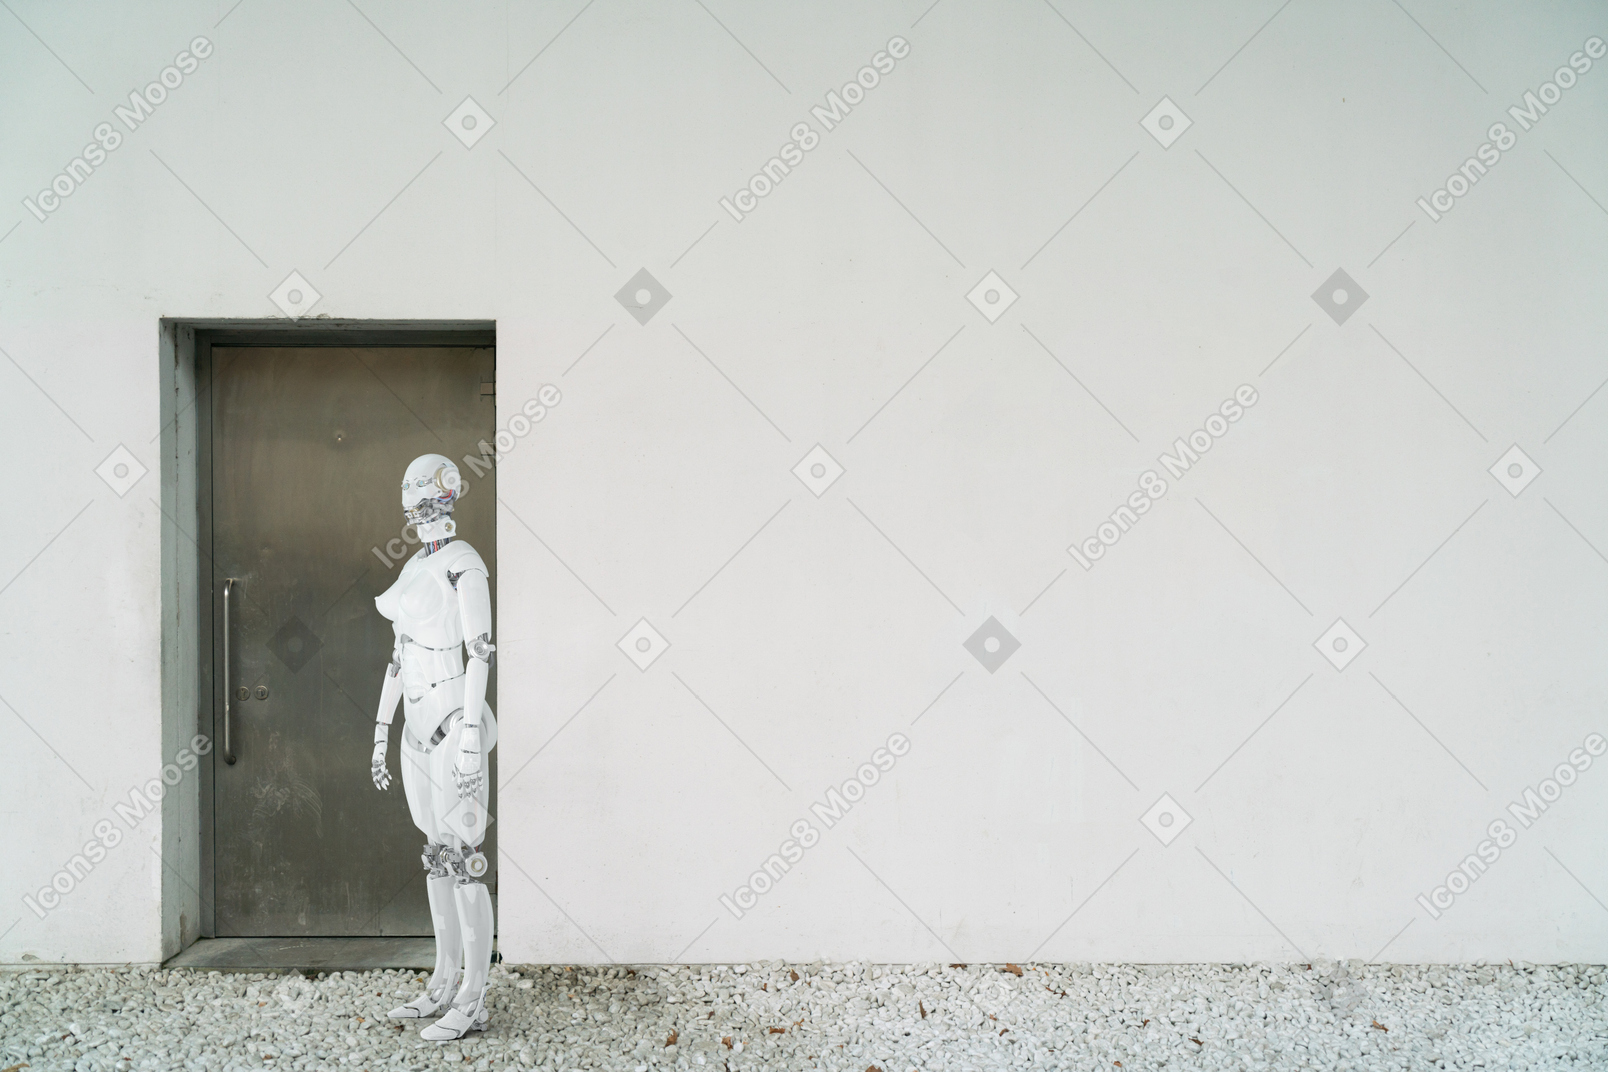 A white robot standing in front of a door